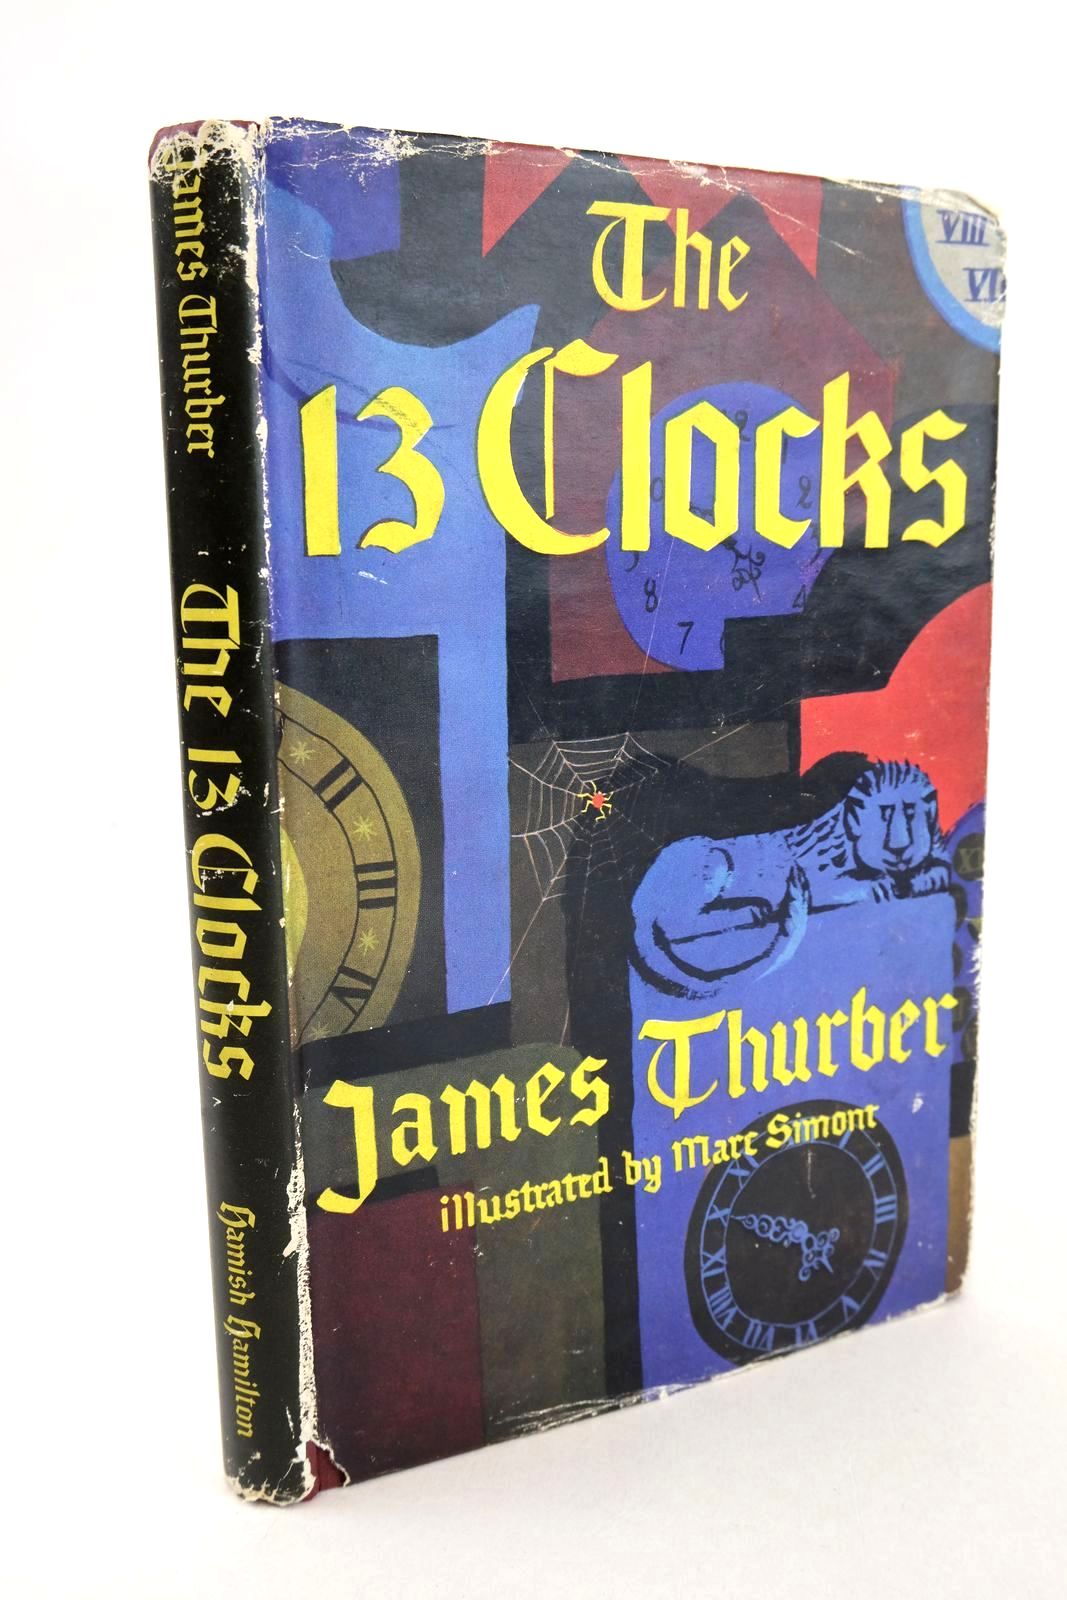 Photo of THE 13 CLOCKS written by Thurber, James illustrated by Simont, Marc published by Hamish Hamilton (STOCK CODE: 1326271)  for sale by Stella & Rose's Books